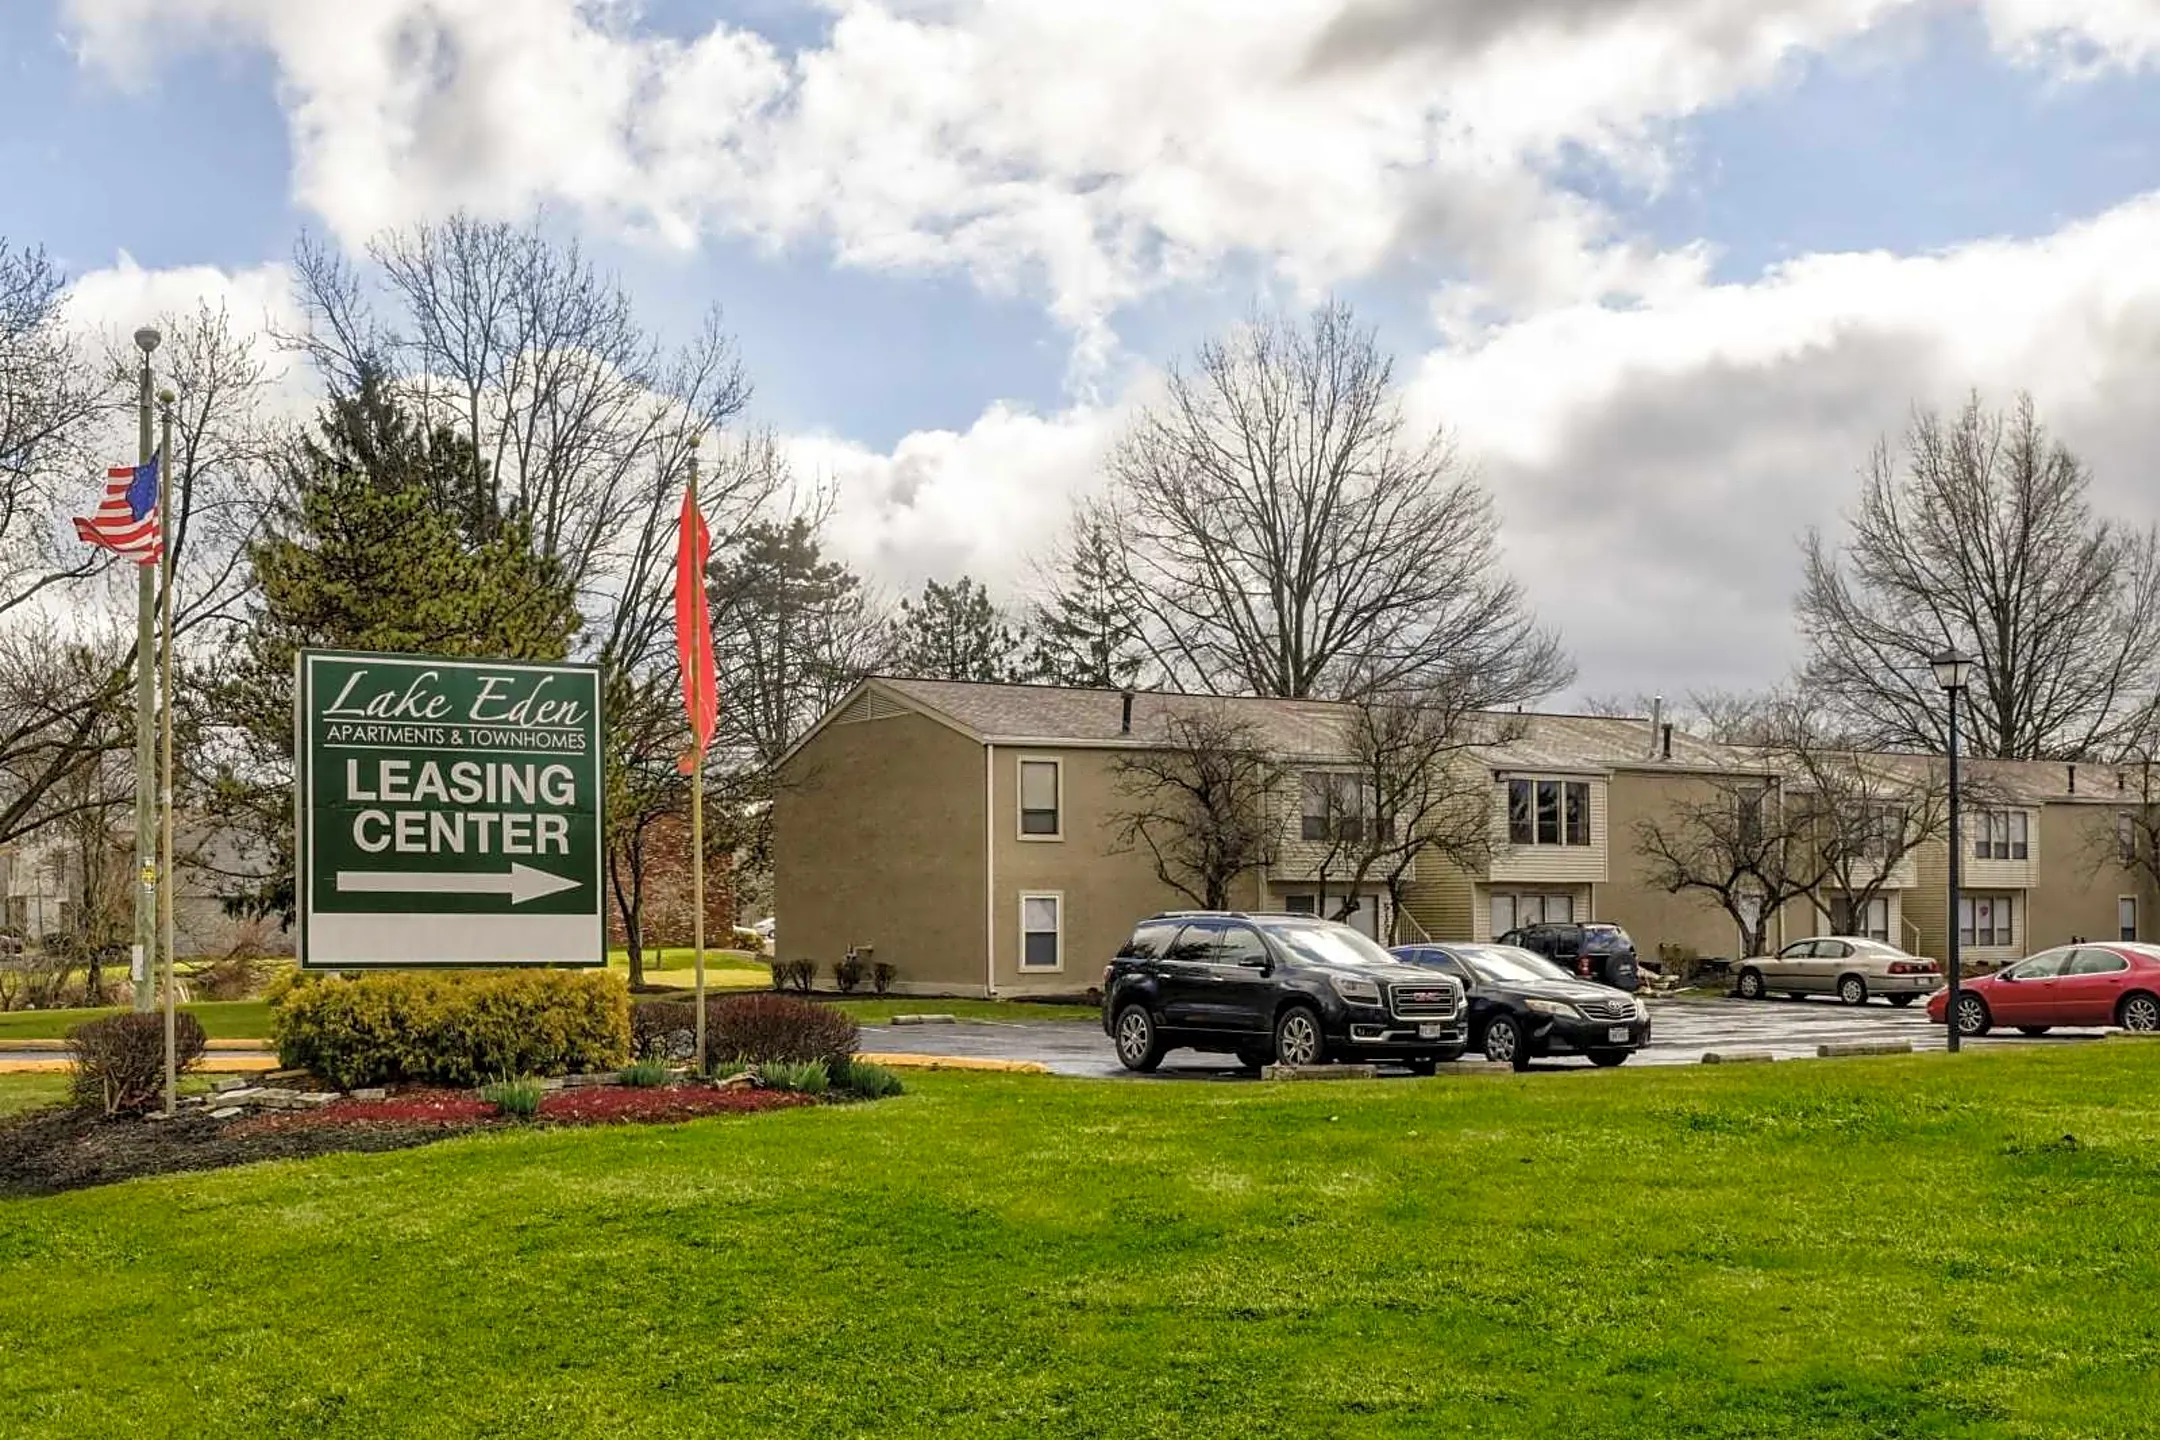 Building - Lake Eden Apartments and Townhomes - Columbus, OH